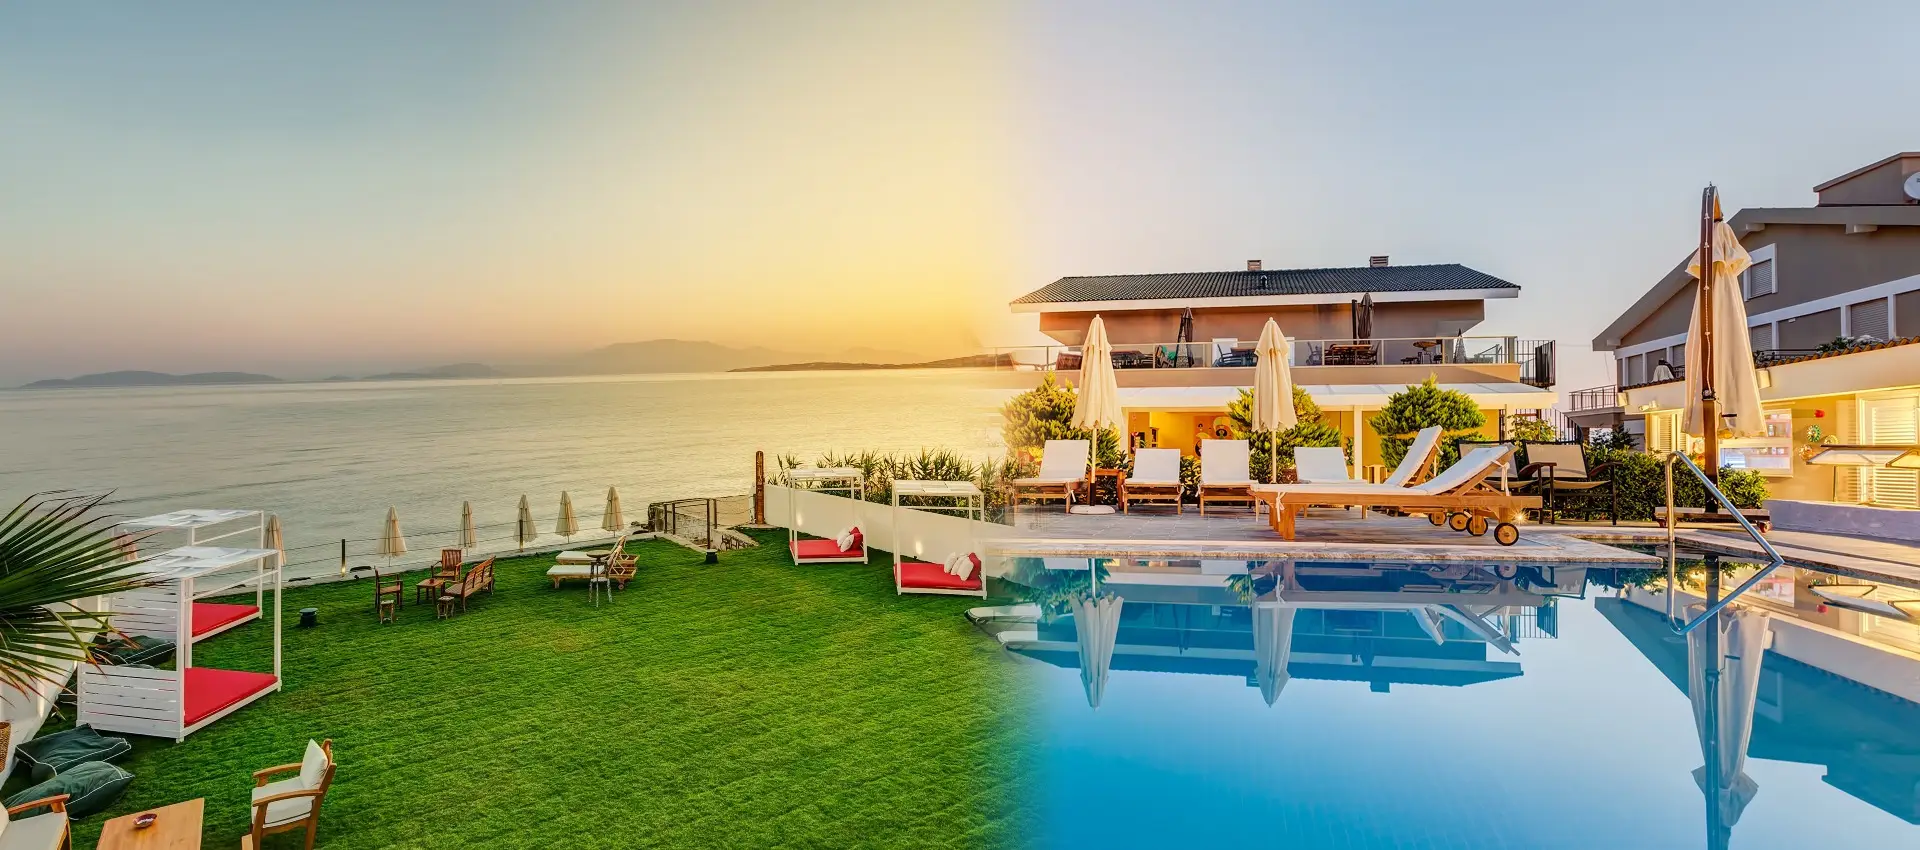 Adults-only hotels | 10 Places in the Aegean for a Romantic Getaway Away from Children